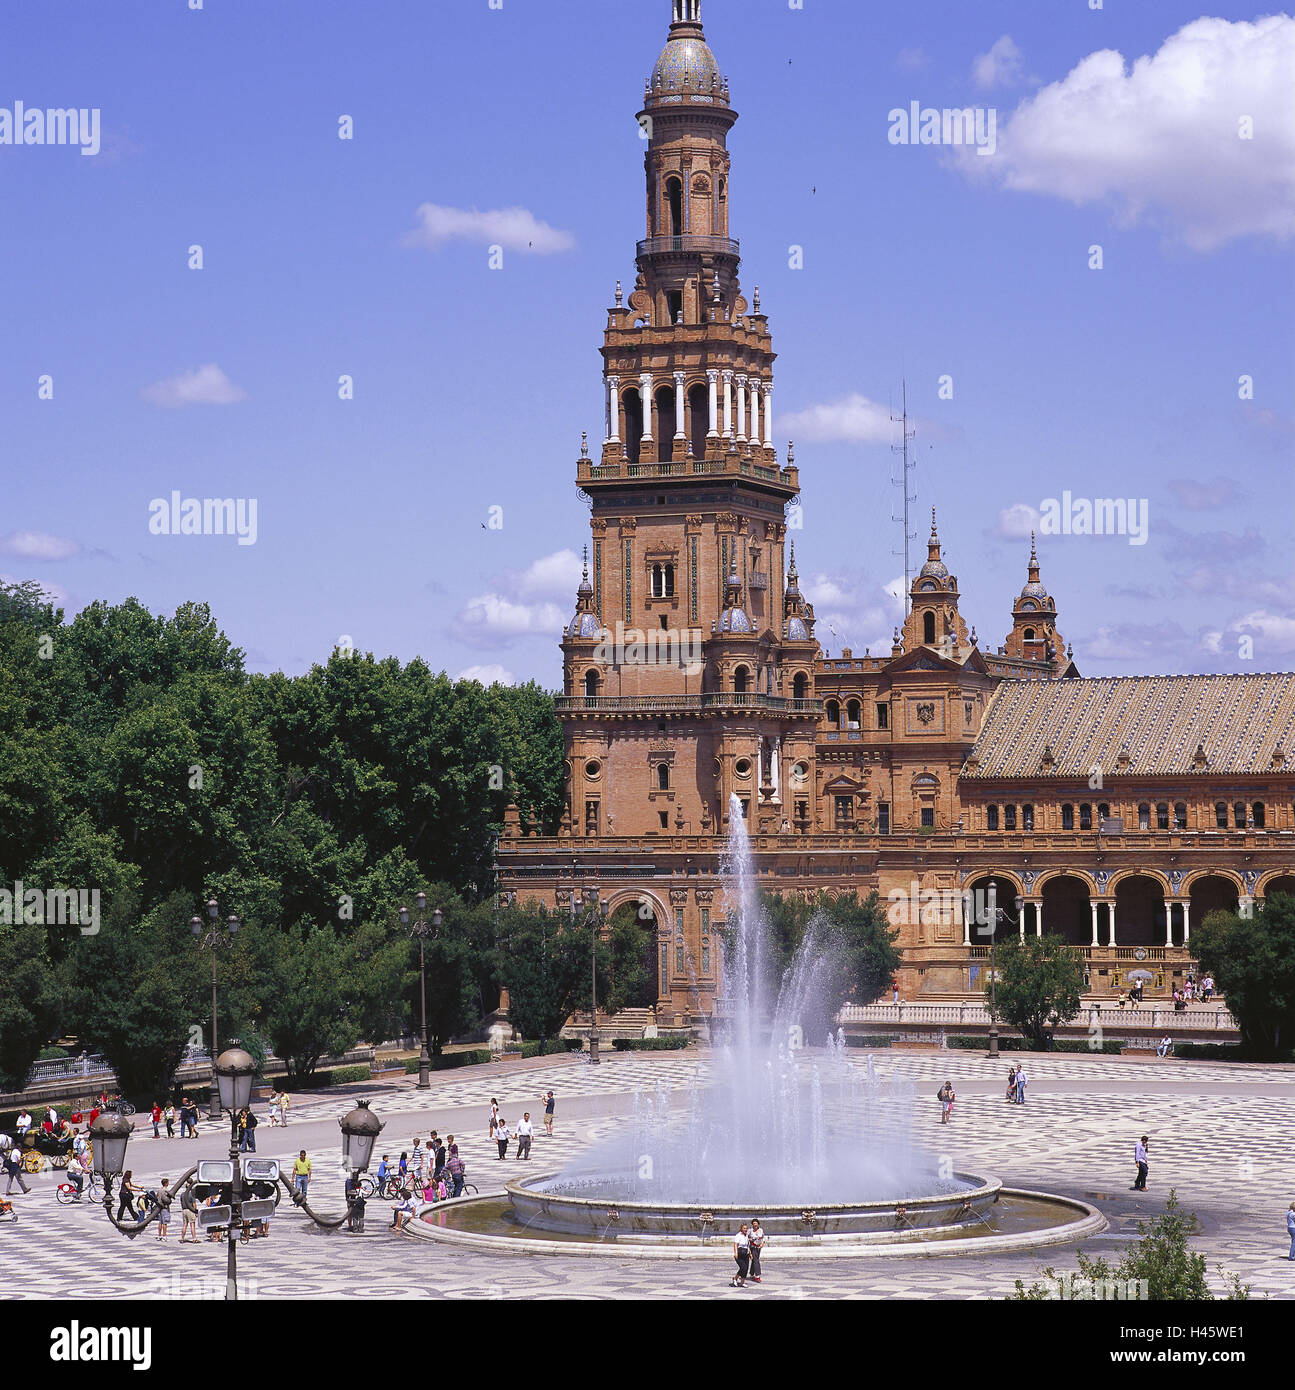 Spain, Andalusia, Seville, plaza Espana, building, semicircle, tower, well, Europe, town, destination, place of interest, space, architecture, outside, people, tourism, Mosaike, structure, fountain, play water, Stock Photo